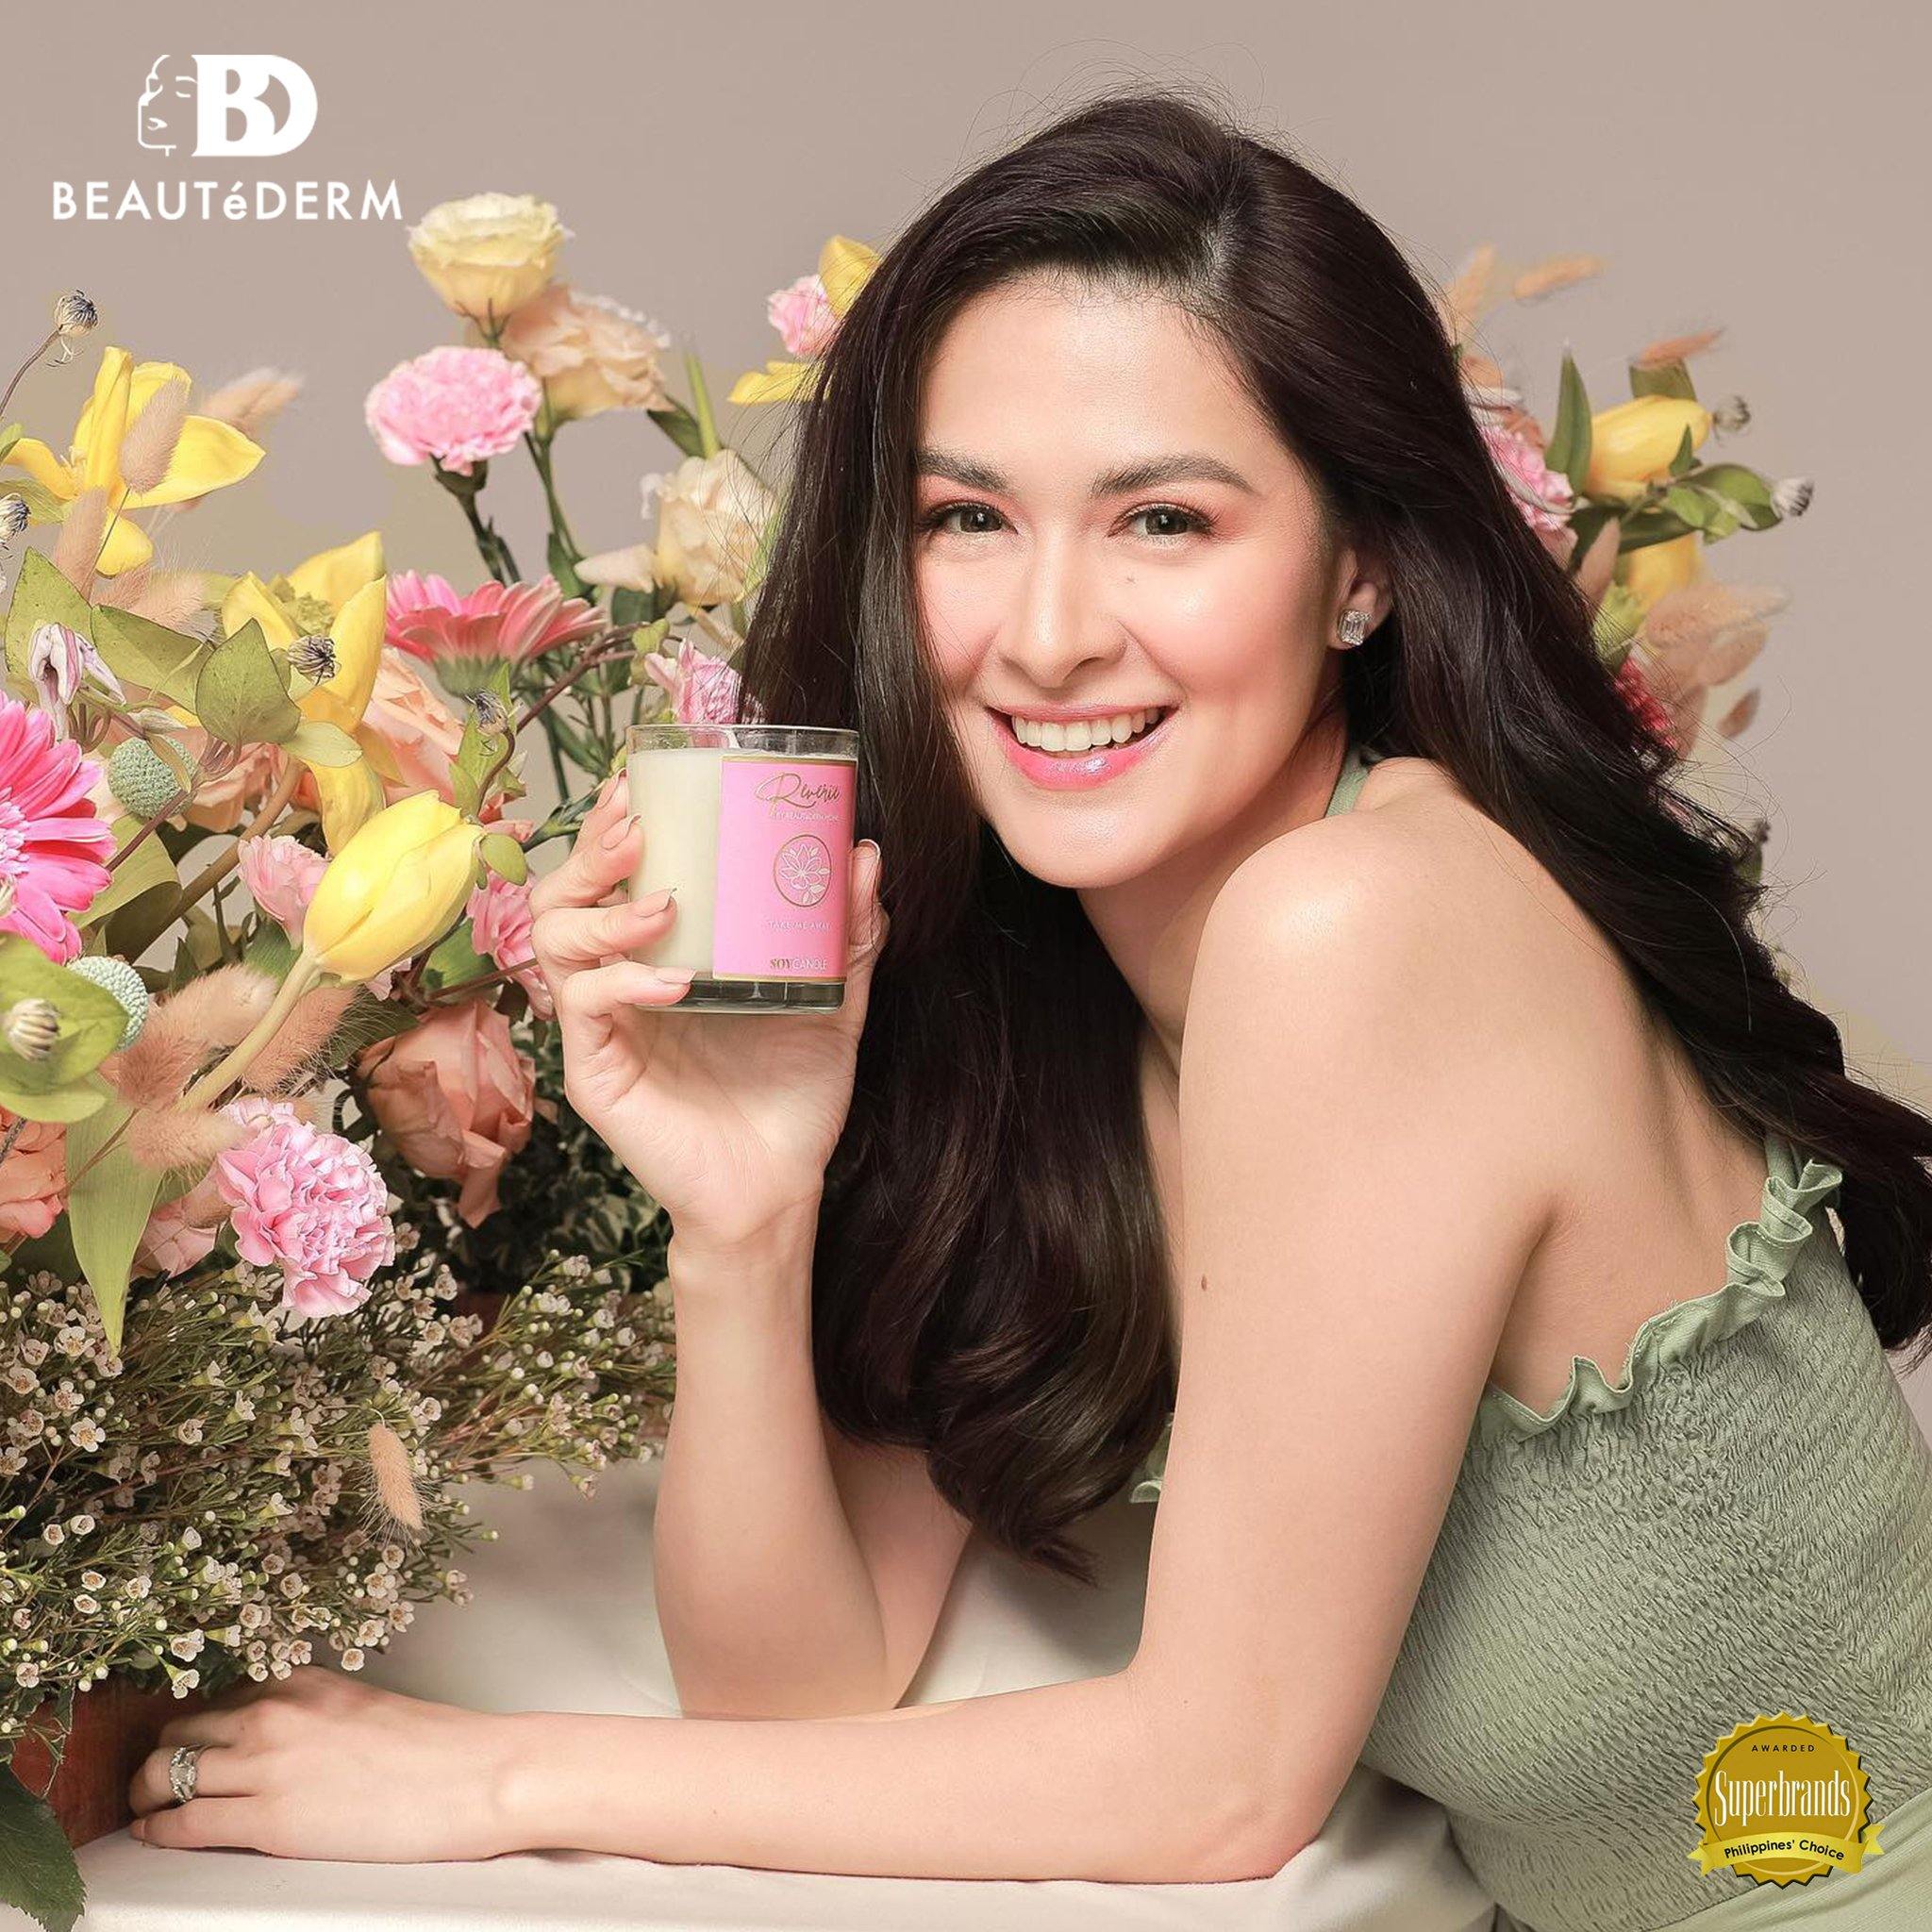 Soy Candle, Take Me Away (Cherry Blossom Scent), Reverie by Beautederm Home, with Marian Rivera-Dantes (Beautederm Home Ambassador)